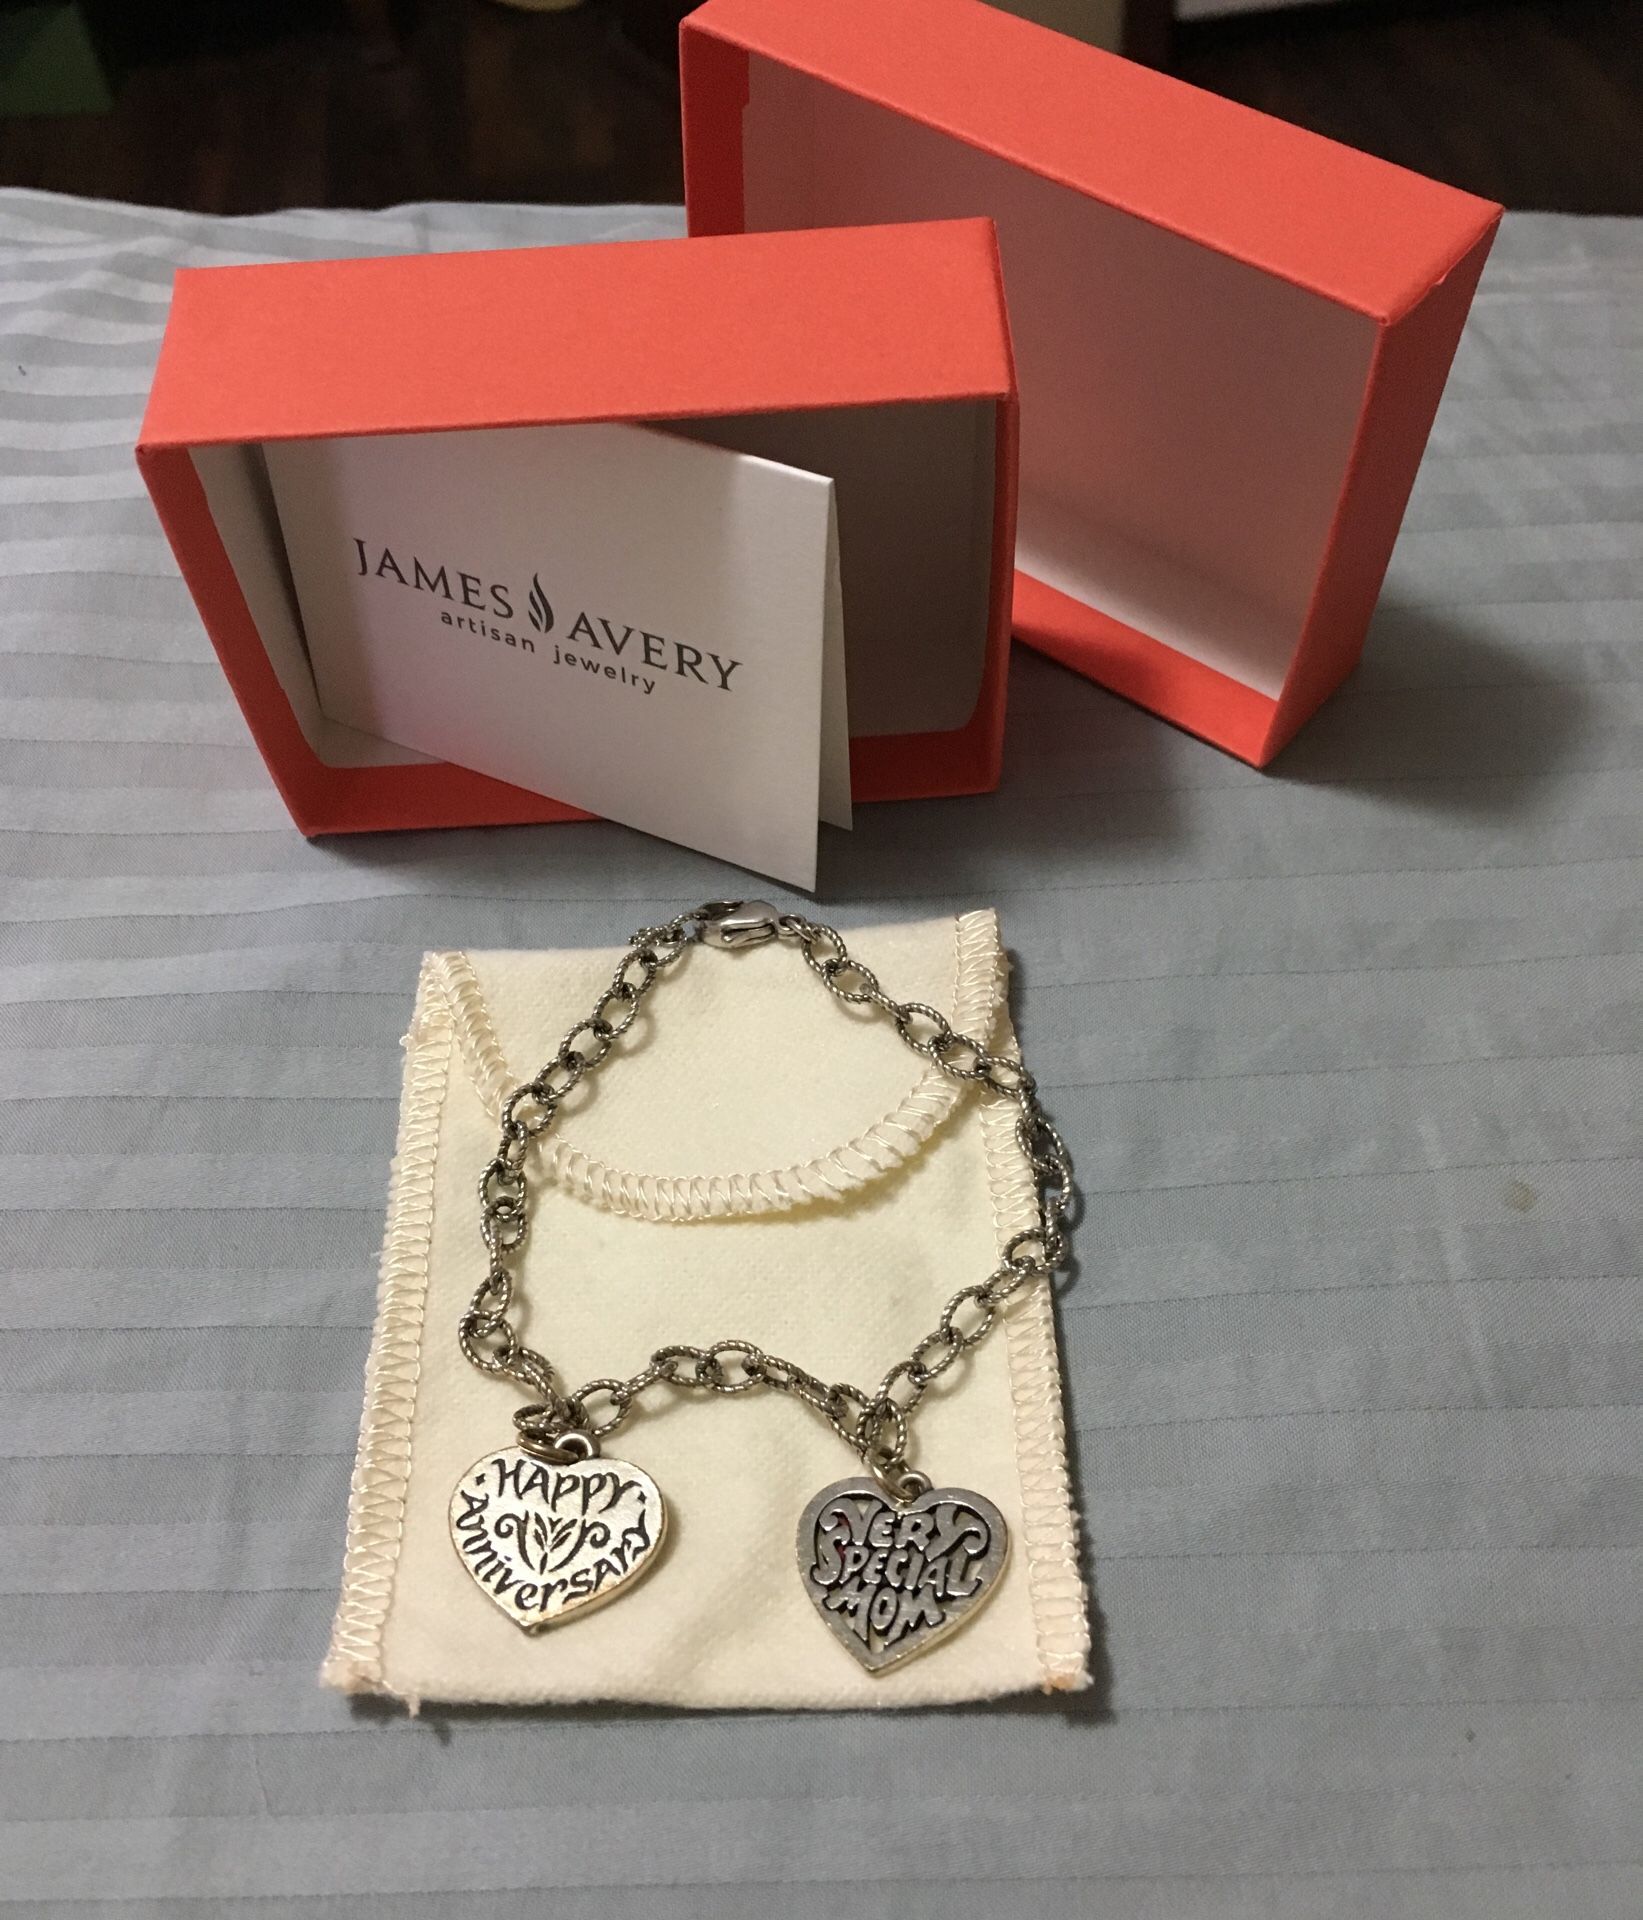 James Avery Bracelet and charms